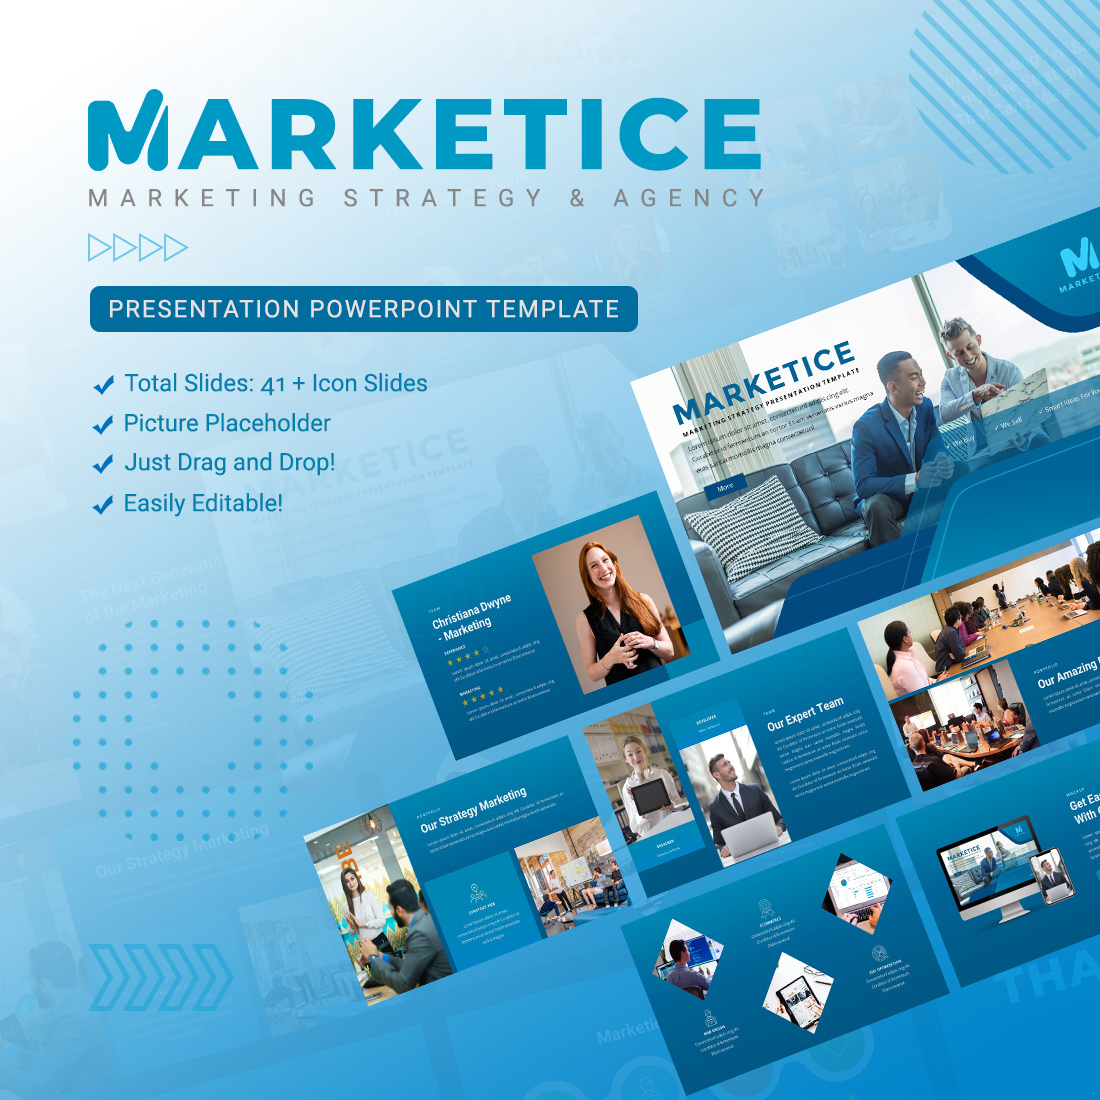 Marketing Strategy Google Slides Template cover image.